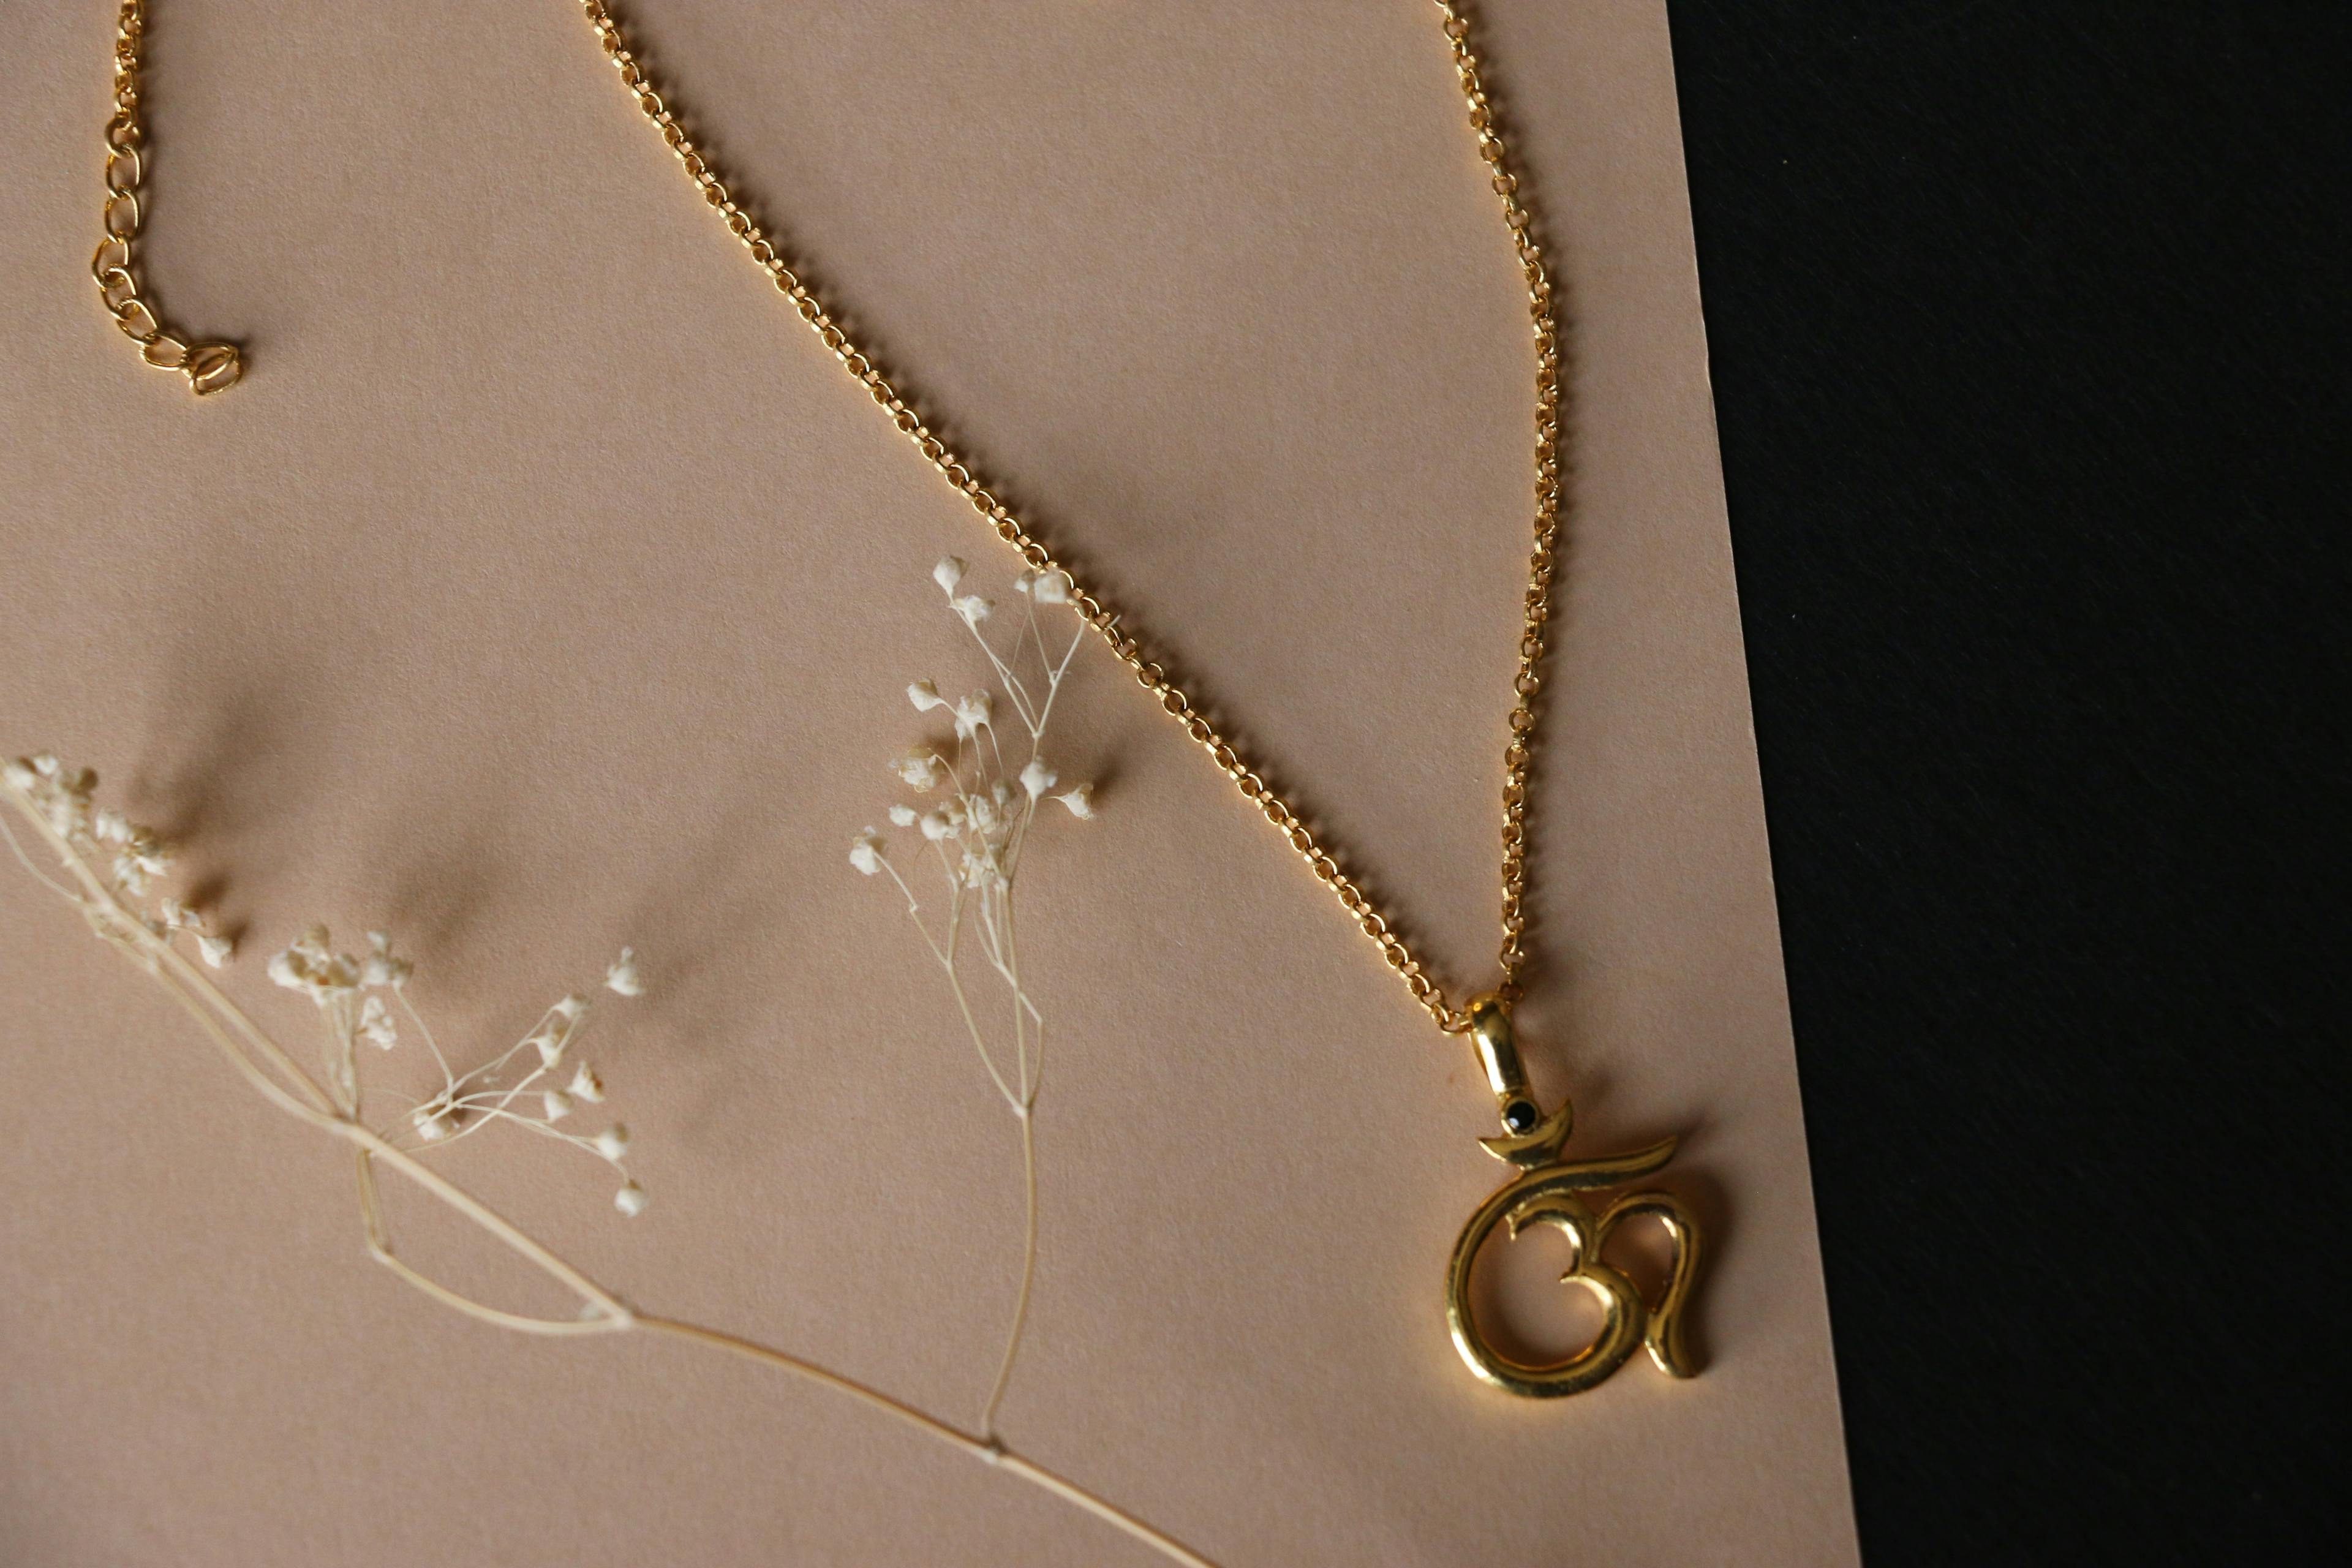 Om charm necklace, a product by The Jewel Closet Store